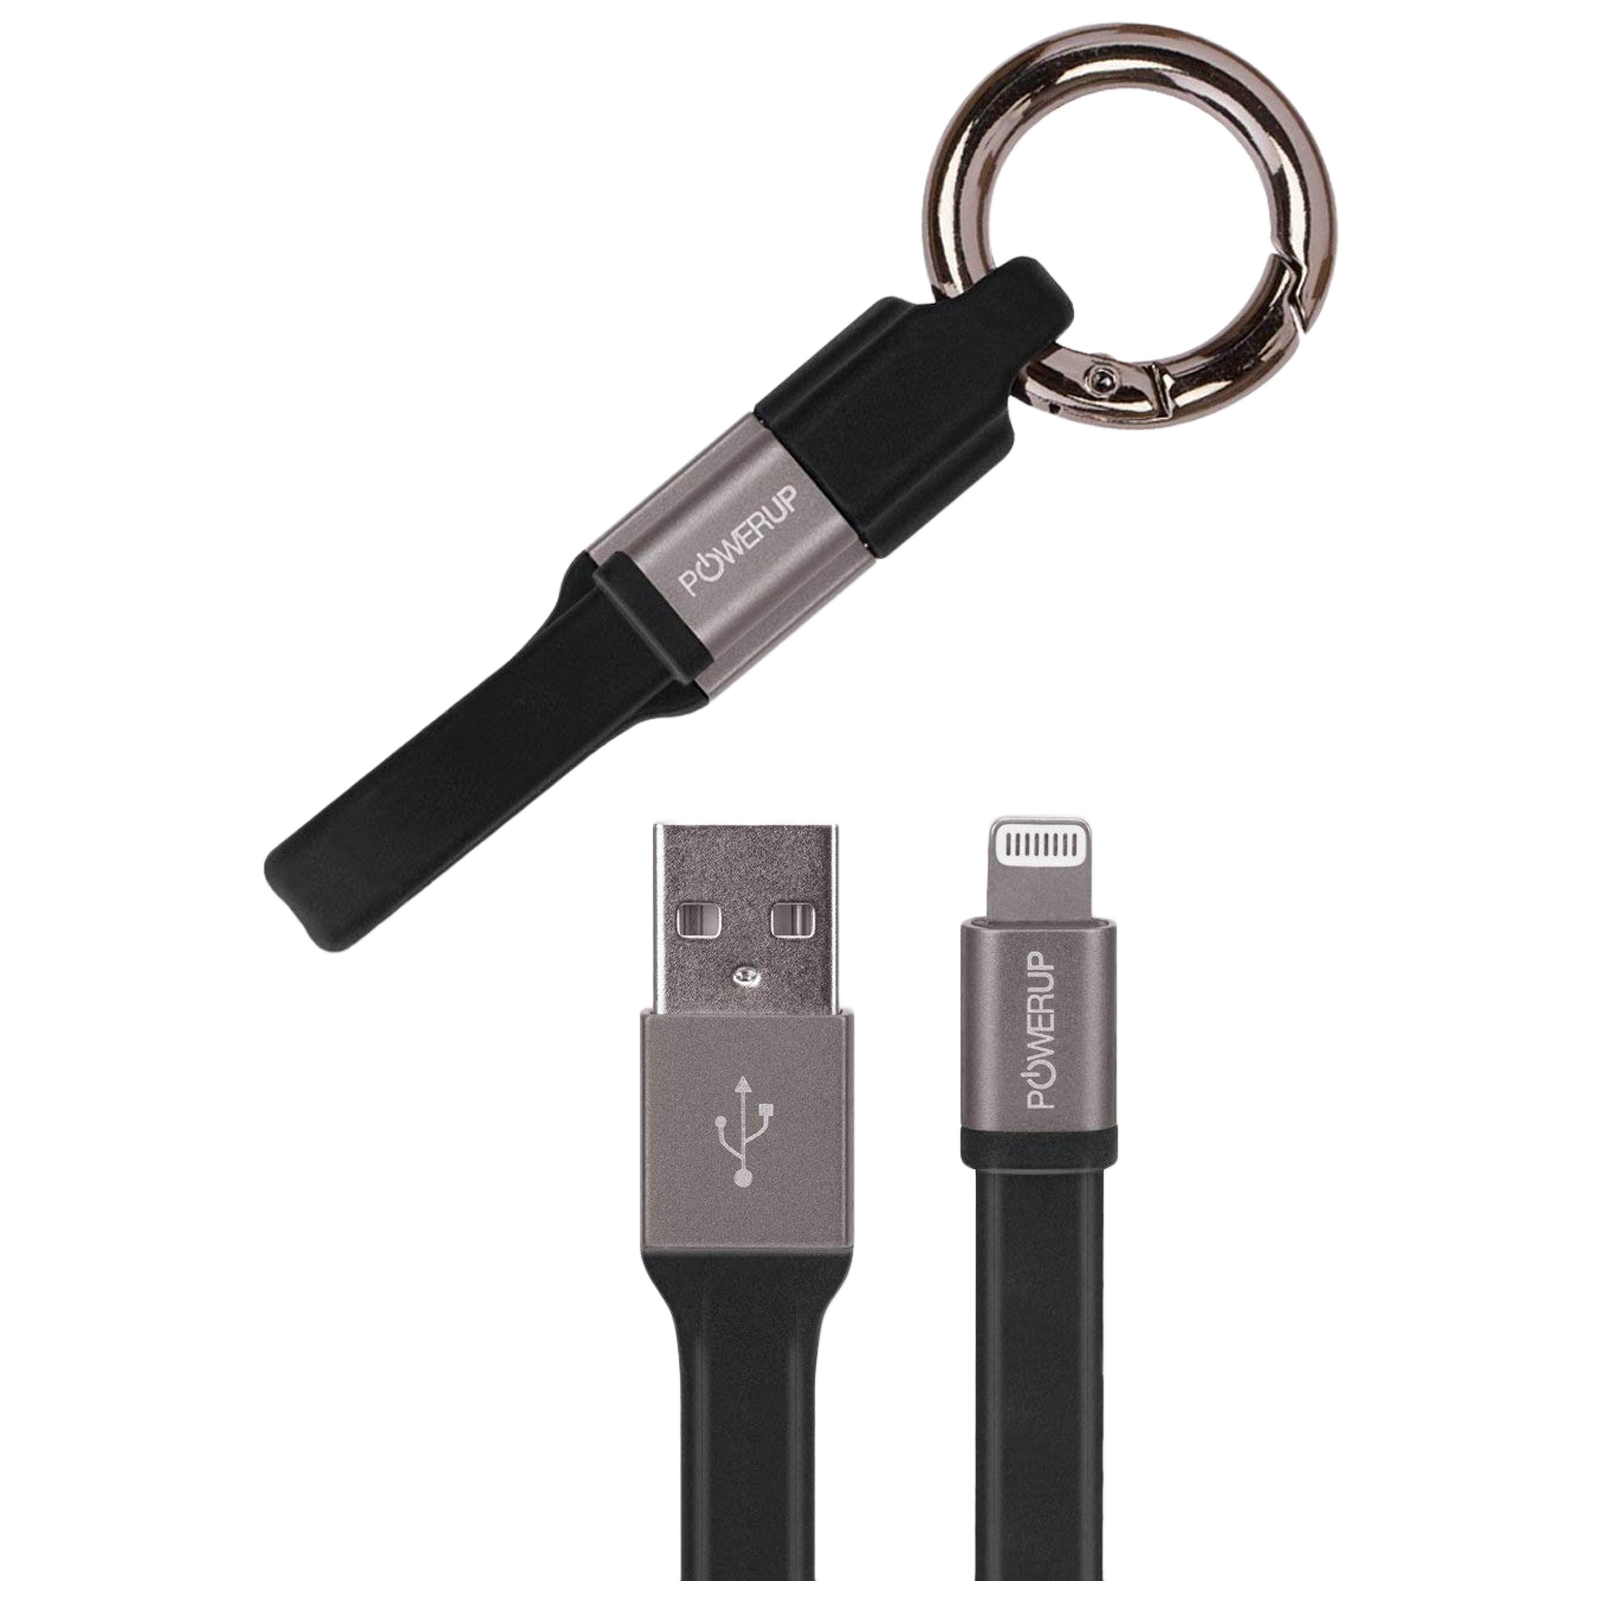 Powerup Stay Charged Rubber 0.12 Meter USB 2.0 Type-A to Lightning Data Transfer and Power/Charging USB Cable with ALURUB Key Ring (Multi-compatibility, PUP-RBKY-12BK, Black)_1